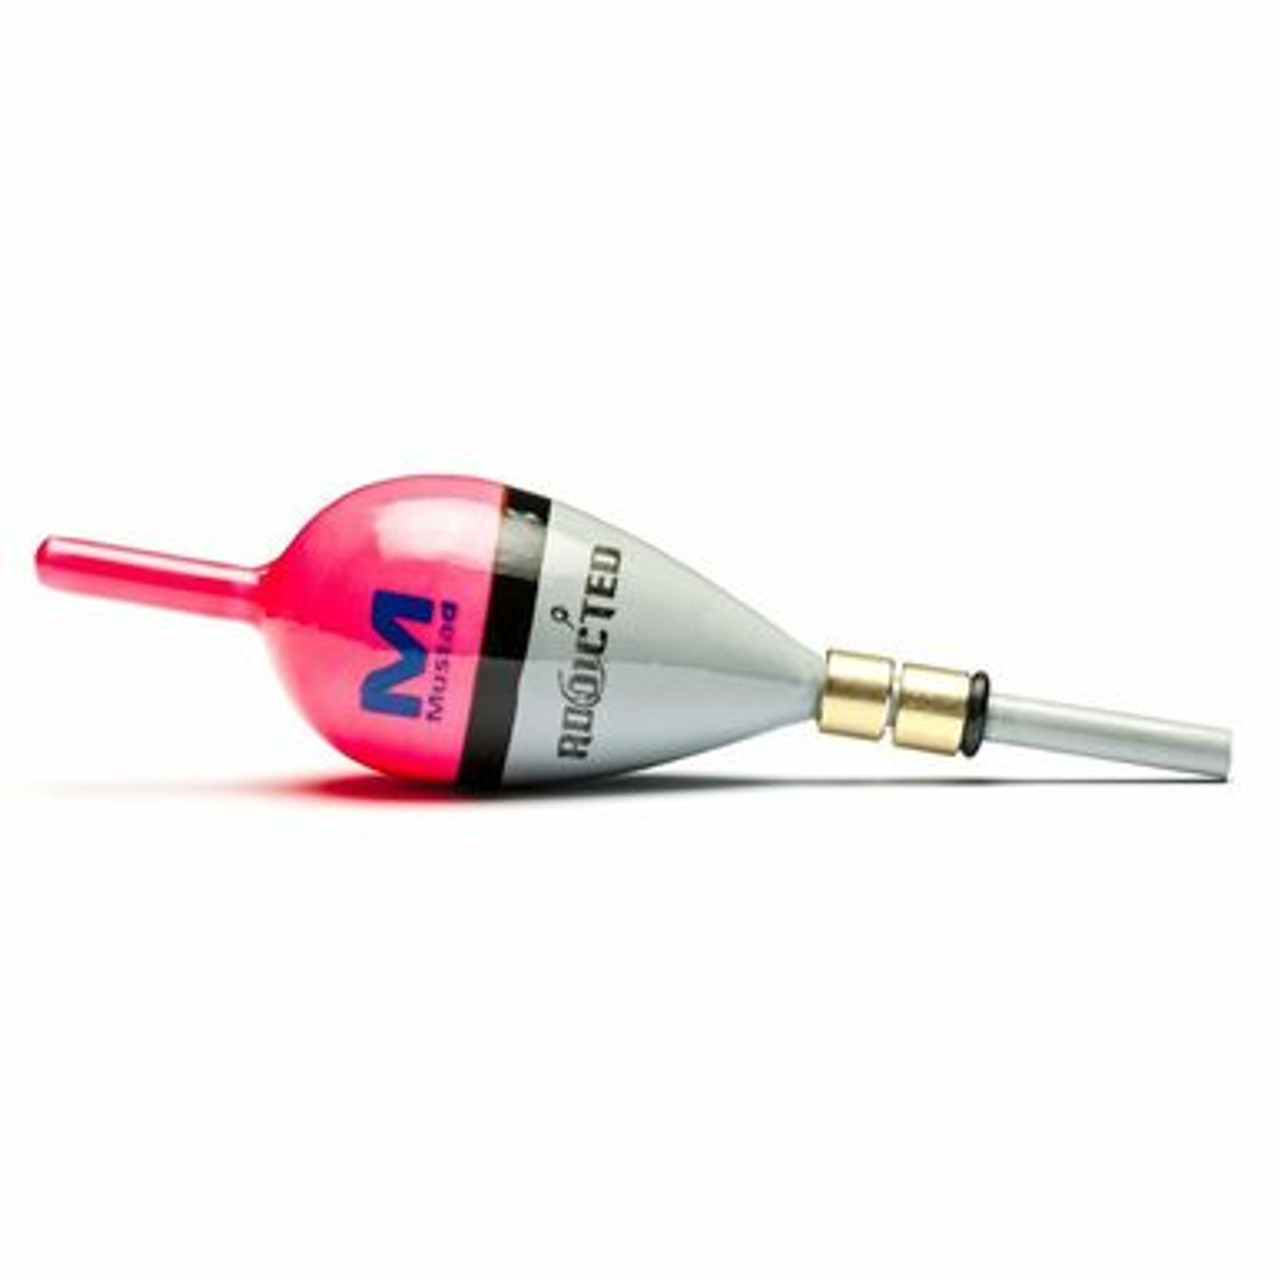 https://cdn11.bigcommerce.com/s-i6ykqoitnd/images/stencil/1280x1280/products/11006/61736/addicted-balsa-fixed-float-system-bobbers-floats-mustad-hot-pink-18oz-722533__33149.1639601108.386.513__44714.1648752979.jpg?c=1&imbypass=on